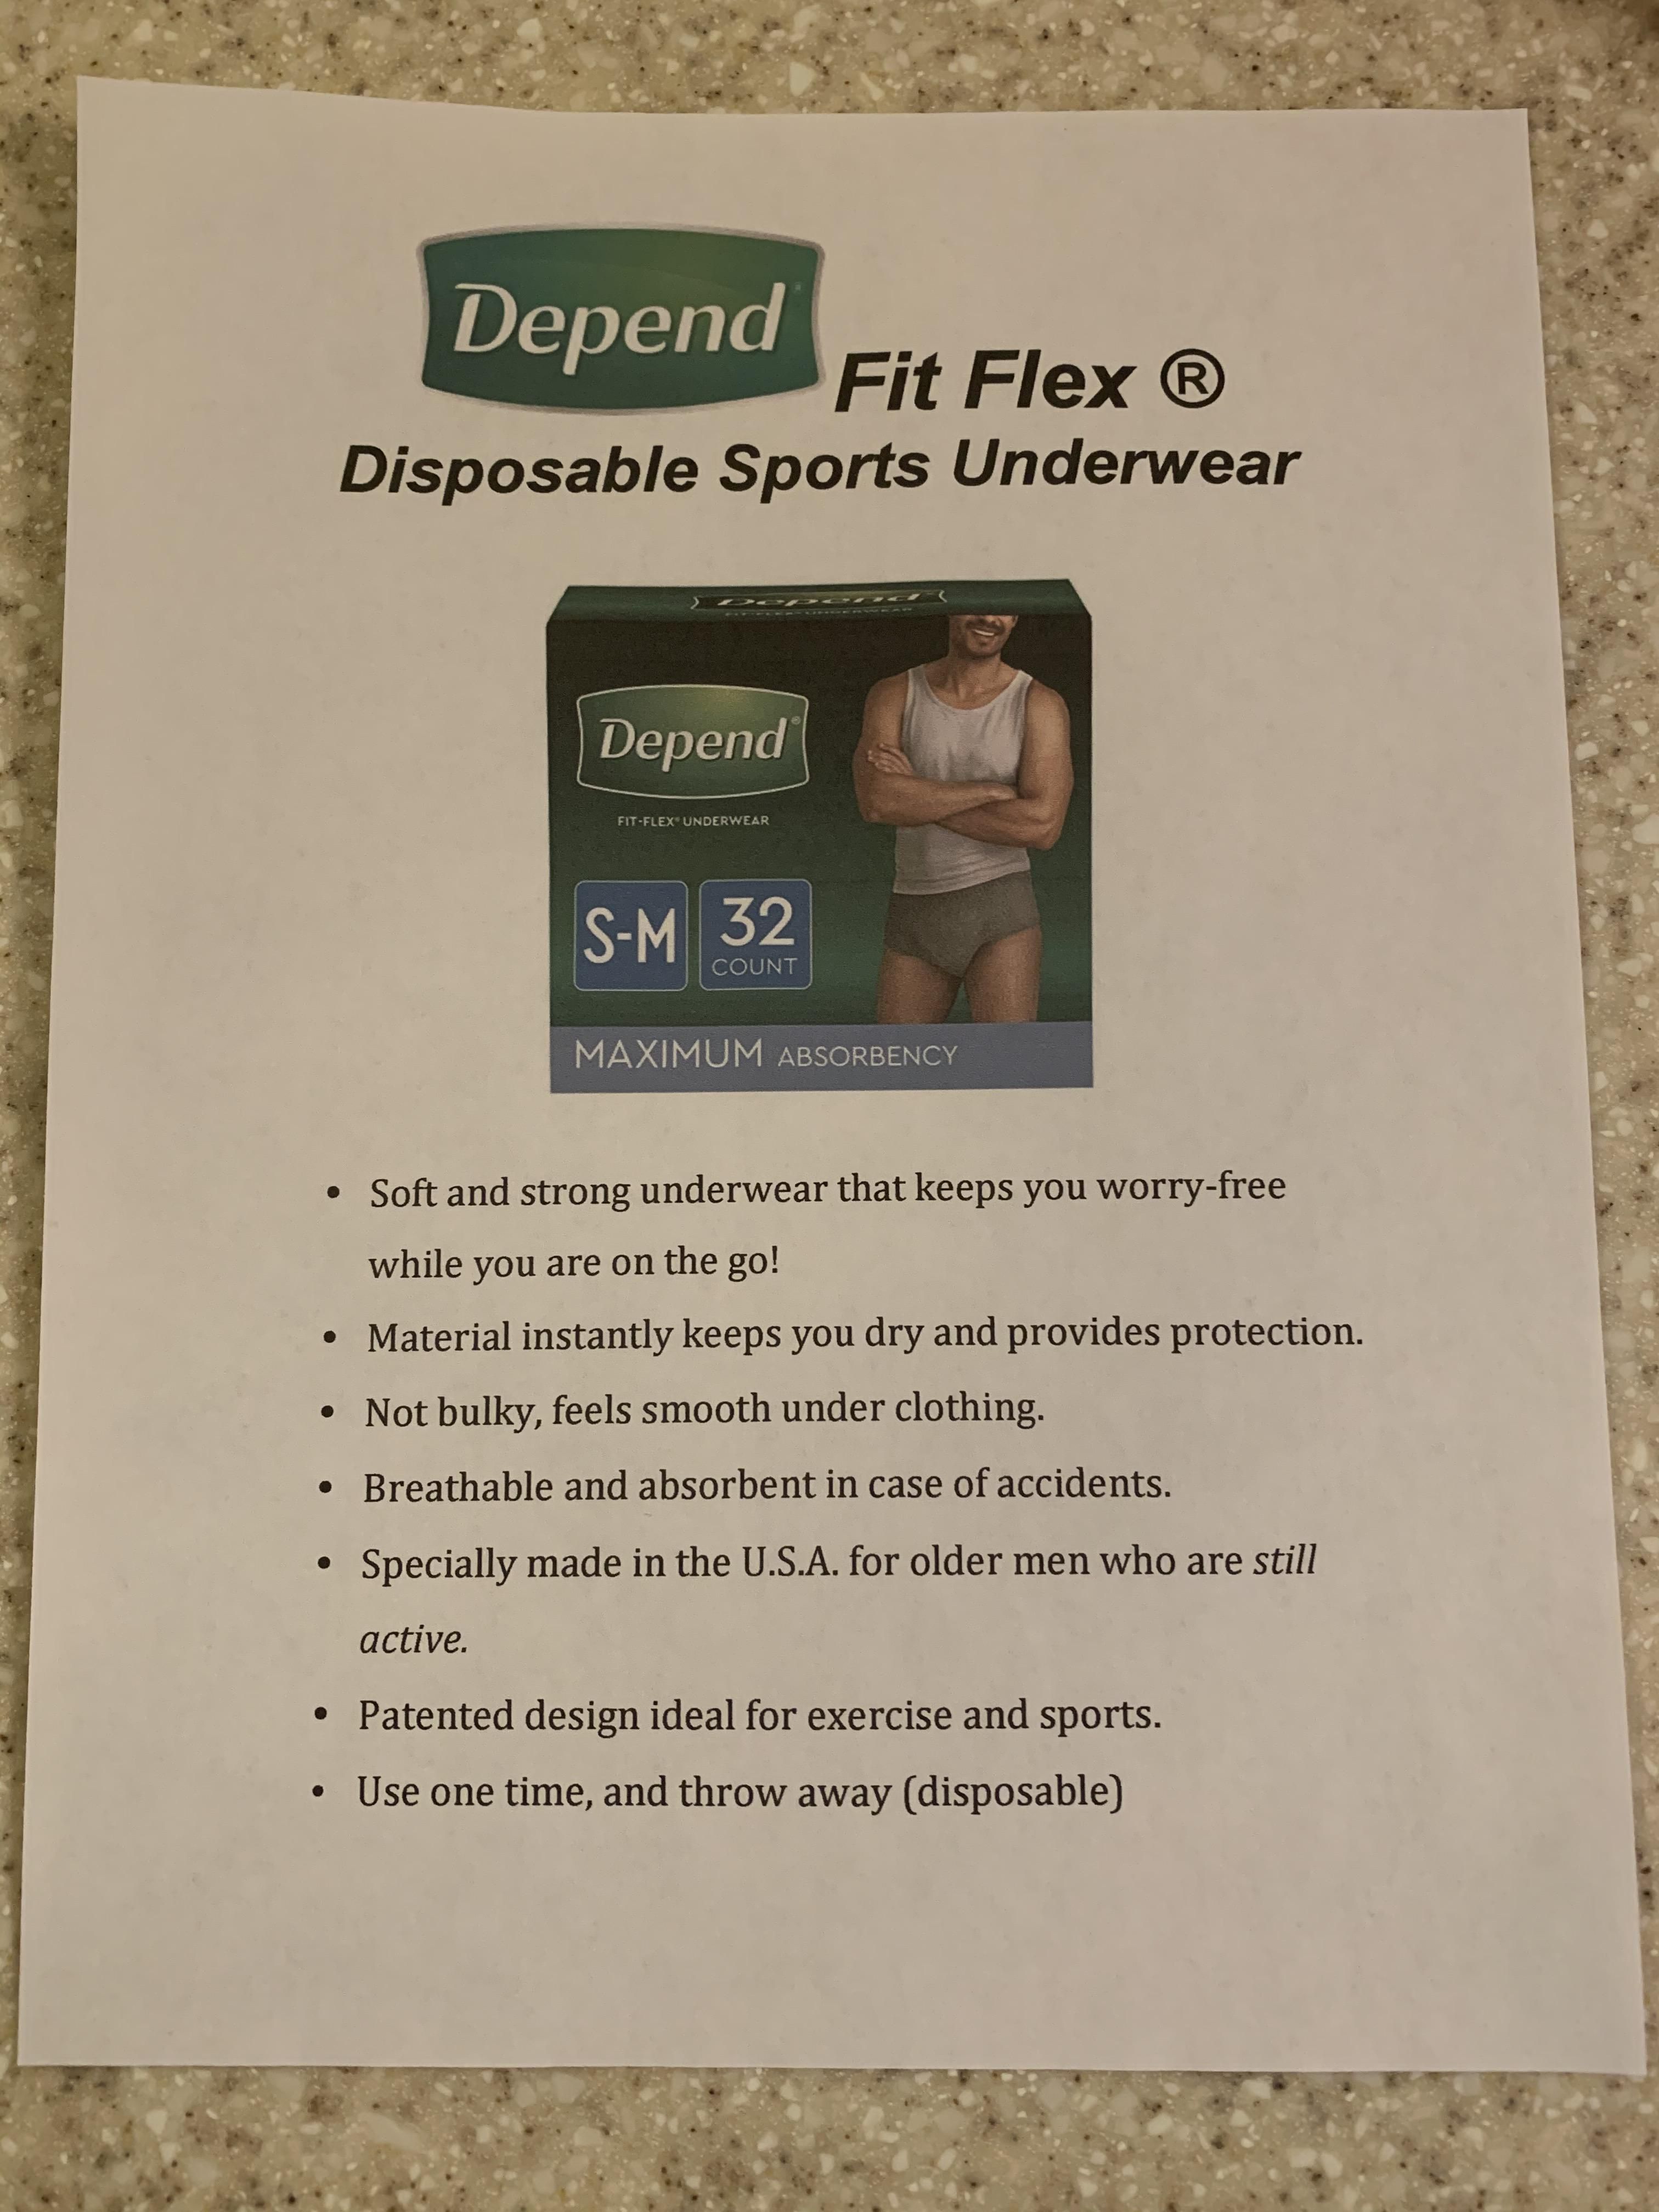 My very elderly father has dementia & needs to start wearing depends, so I made a fake ad for “Disposable Sports Underwear” so he can use them without shame